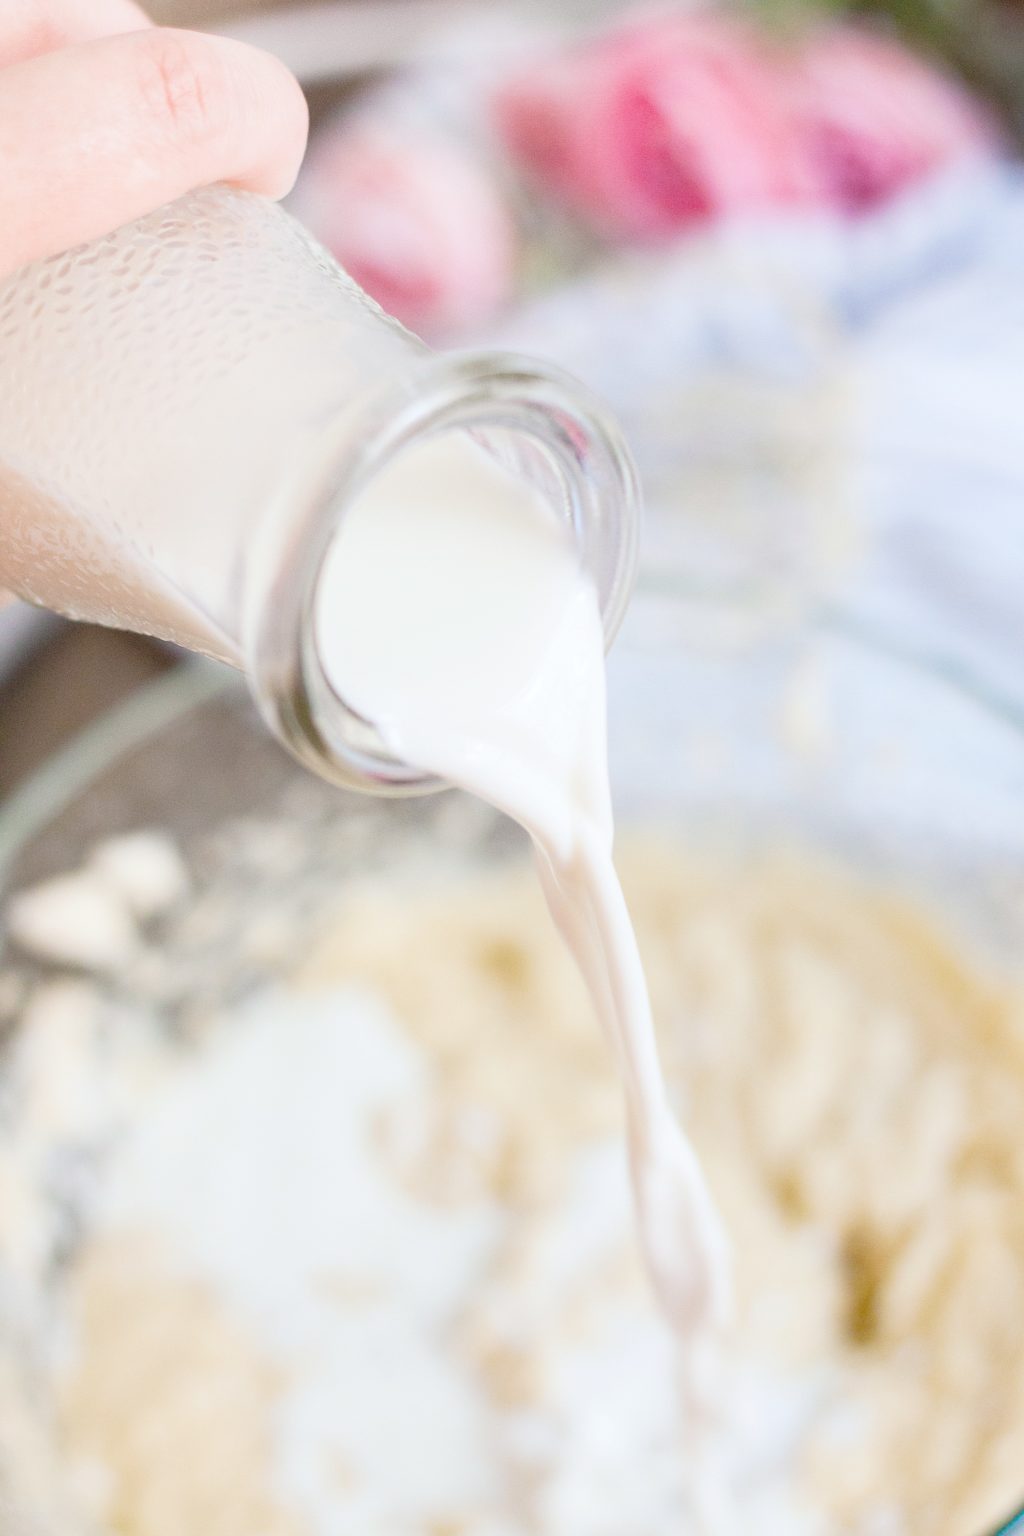 Milk is poured onto mixture in a bowl. 